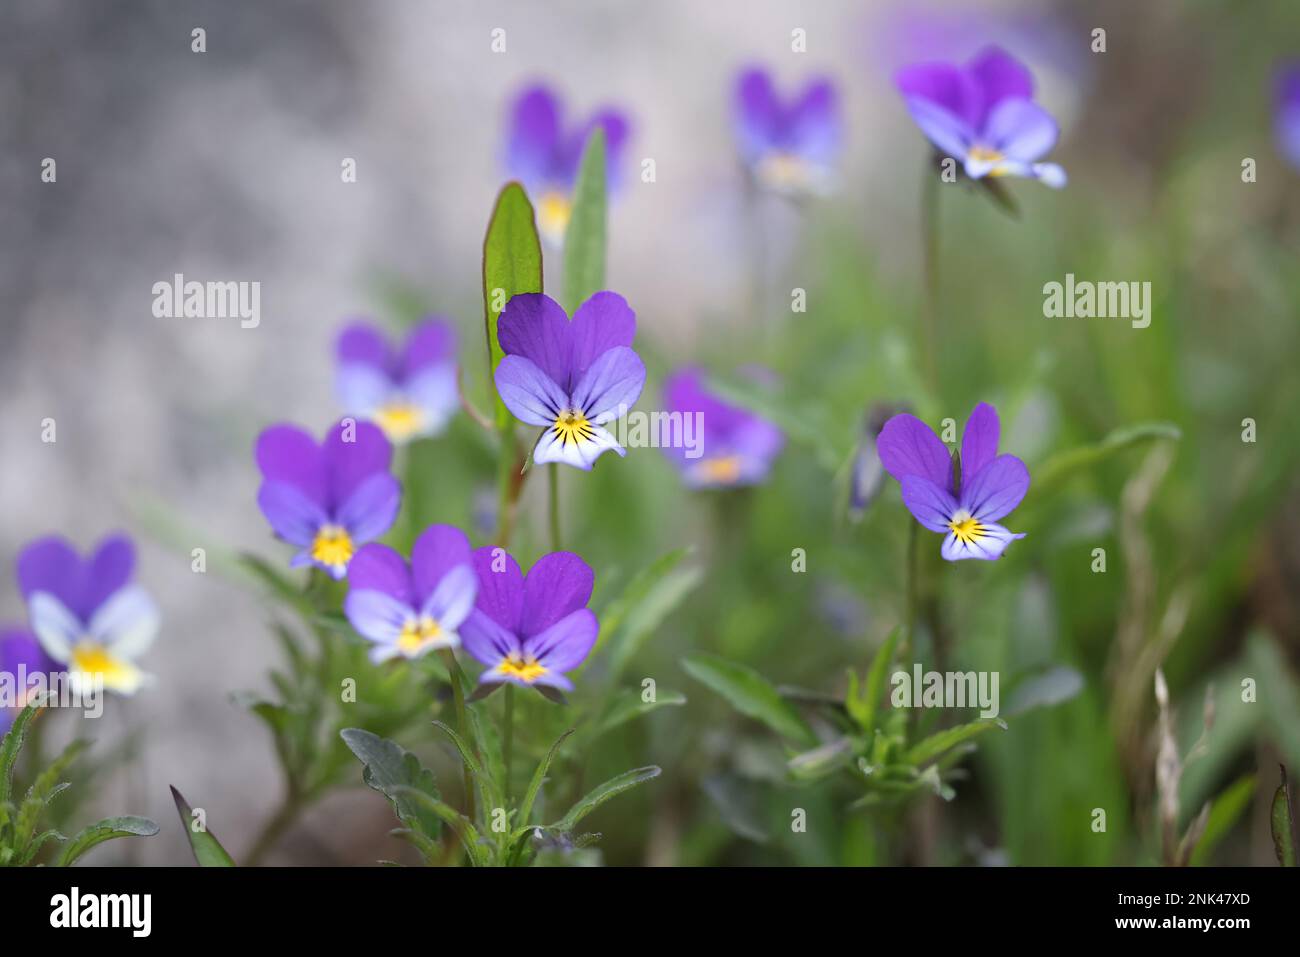 Viola tricolor, known as Johnny Jump up, heartsease, heart's delight and many other names, wild flower from Finland Stock Photo